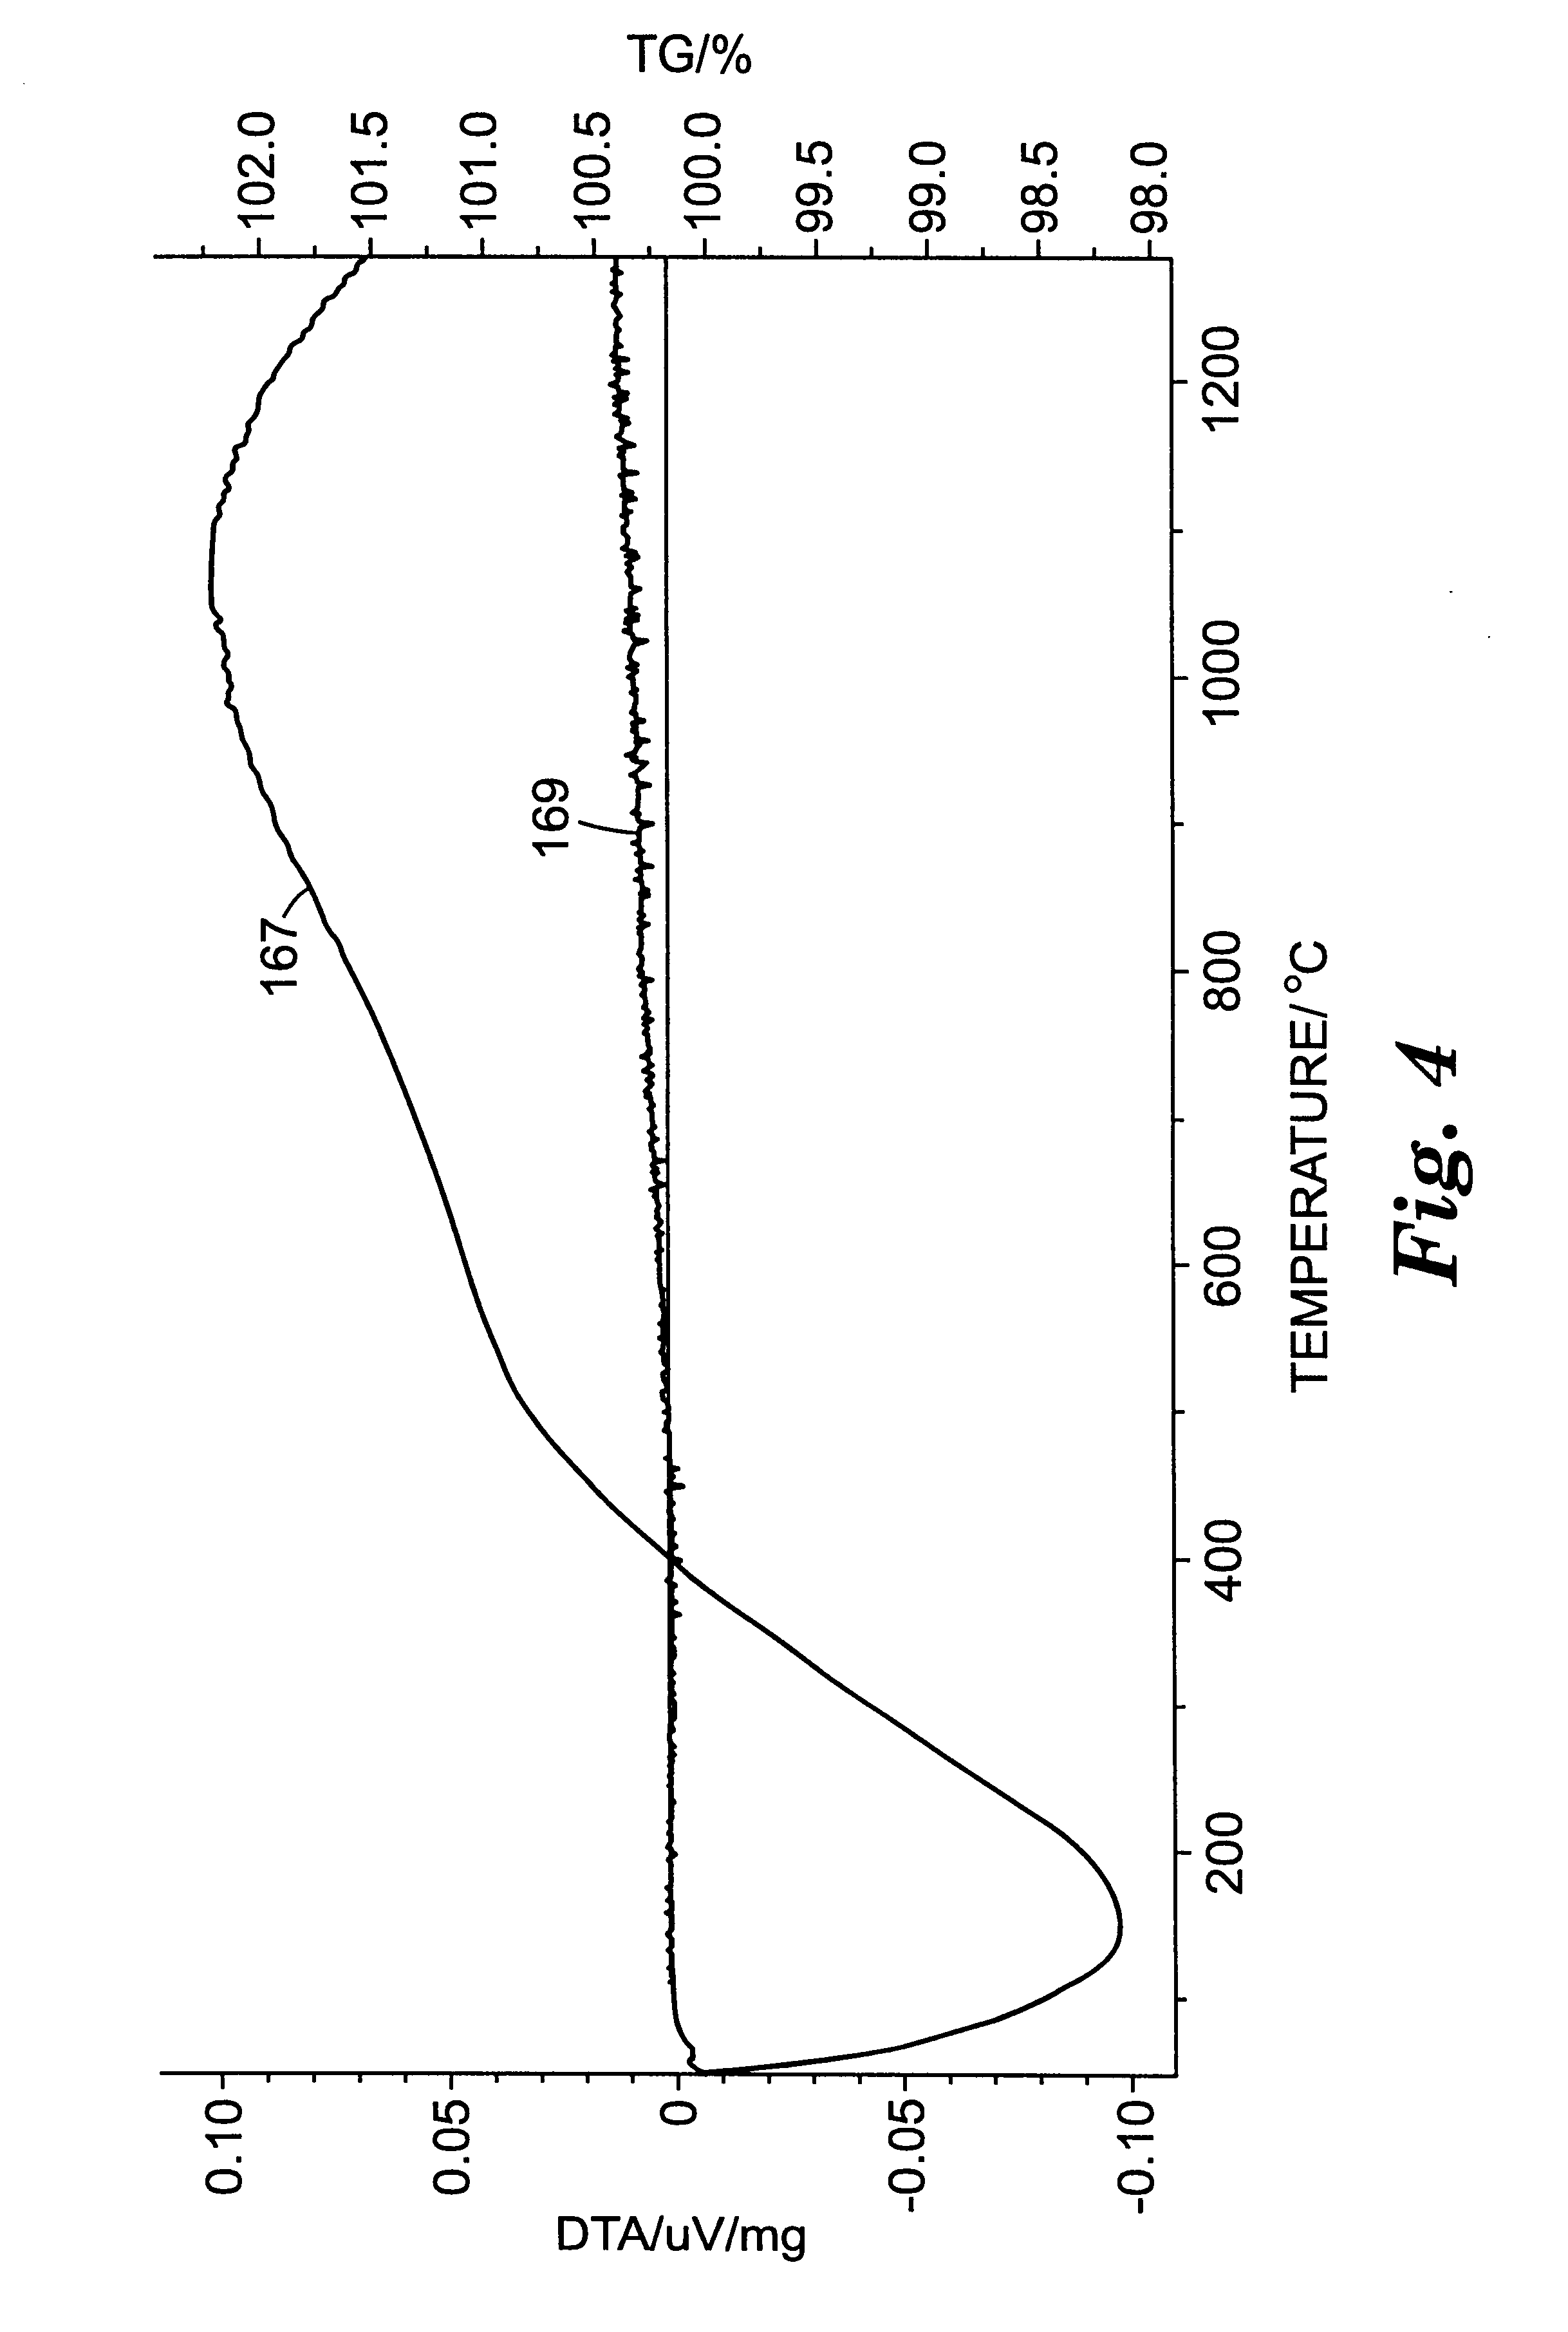 Fused AL2O3-rare earth oxide-ZrO2 eutectic abrasive particles, abrasive articles, and methods of making and using the same